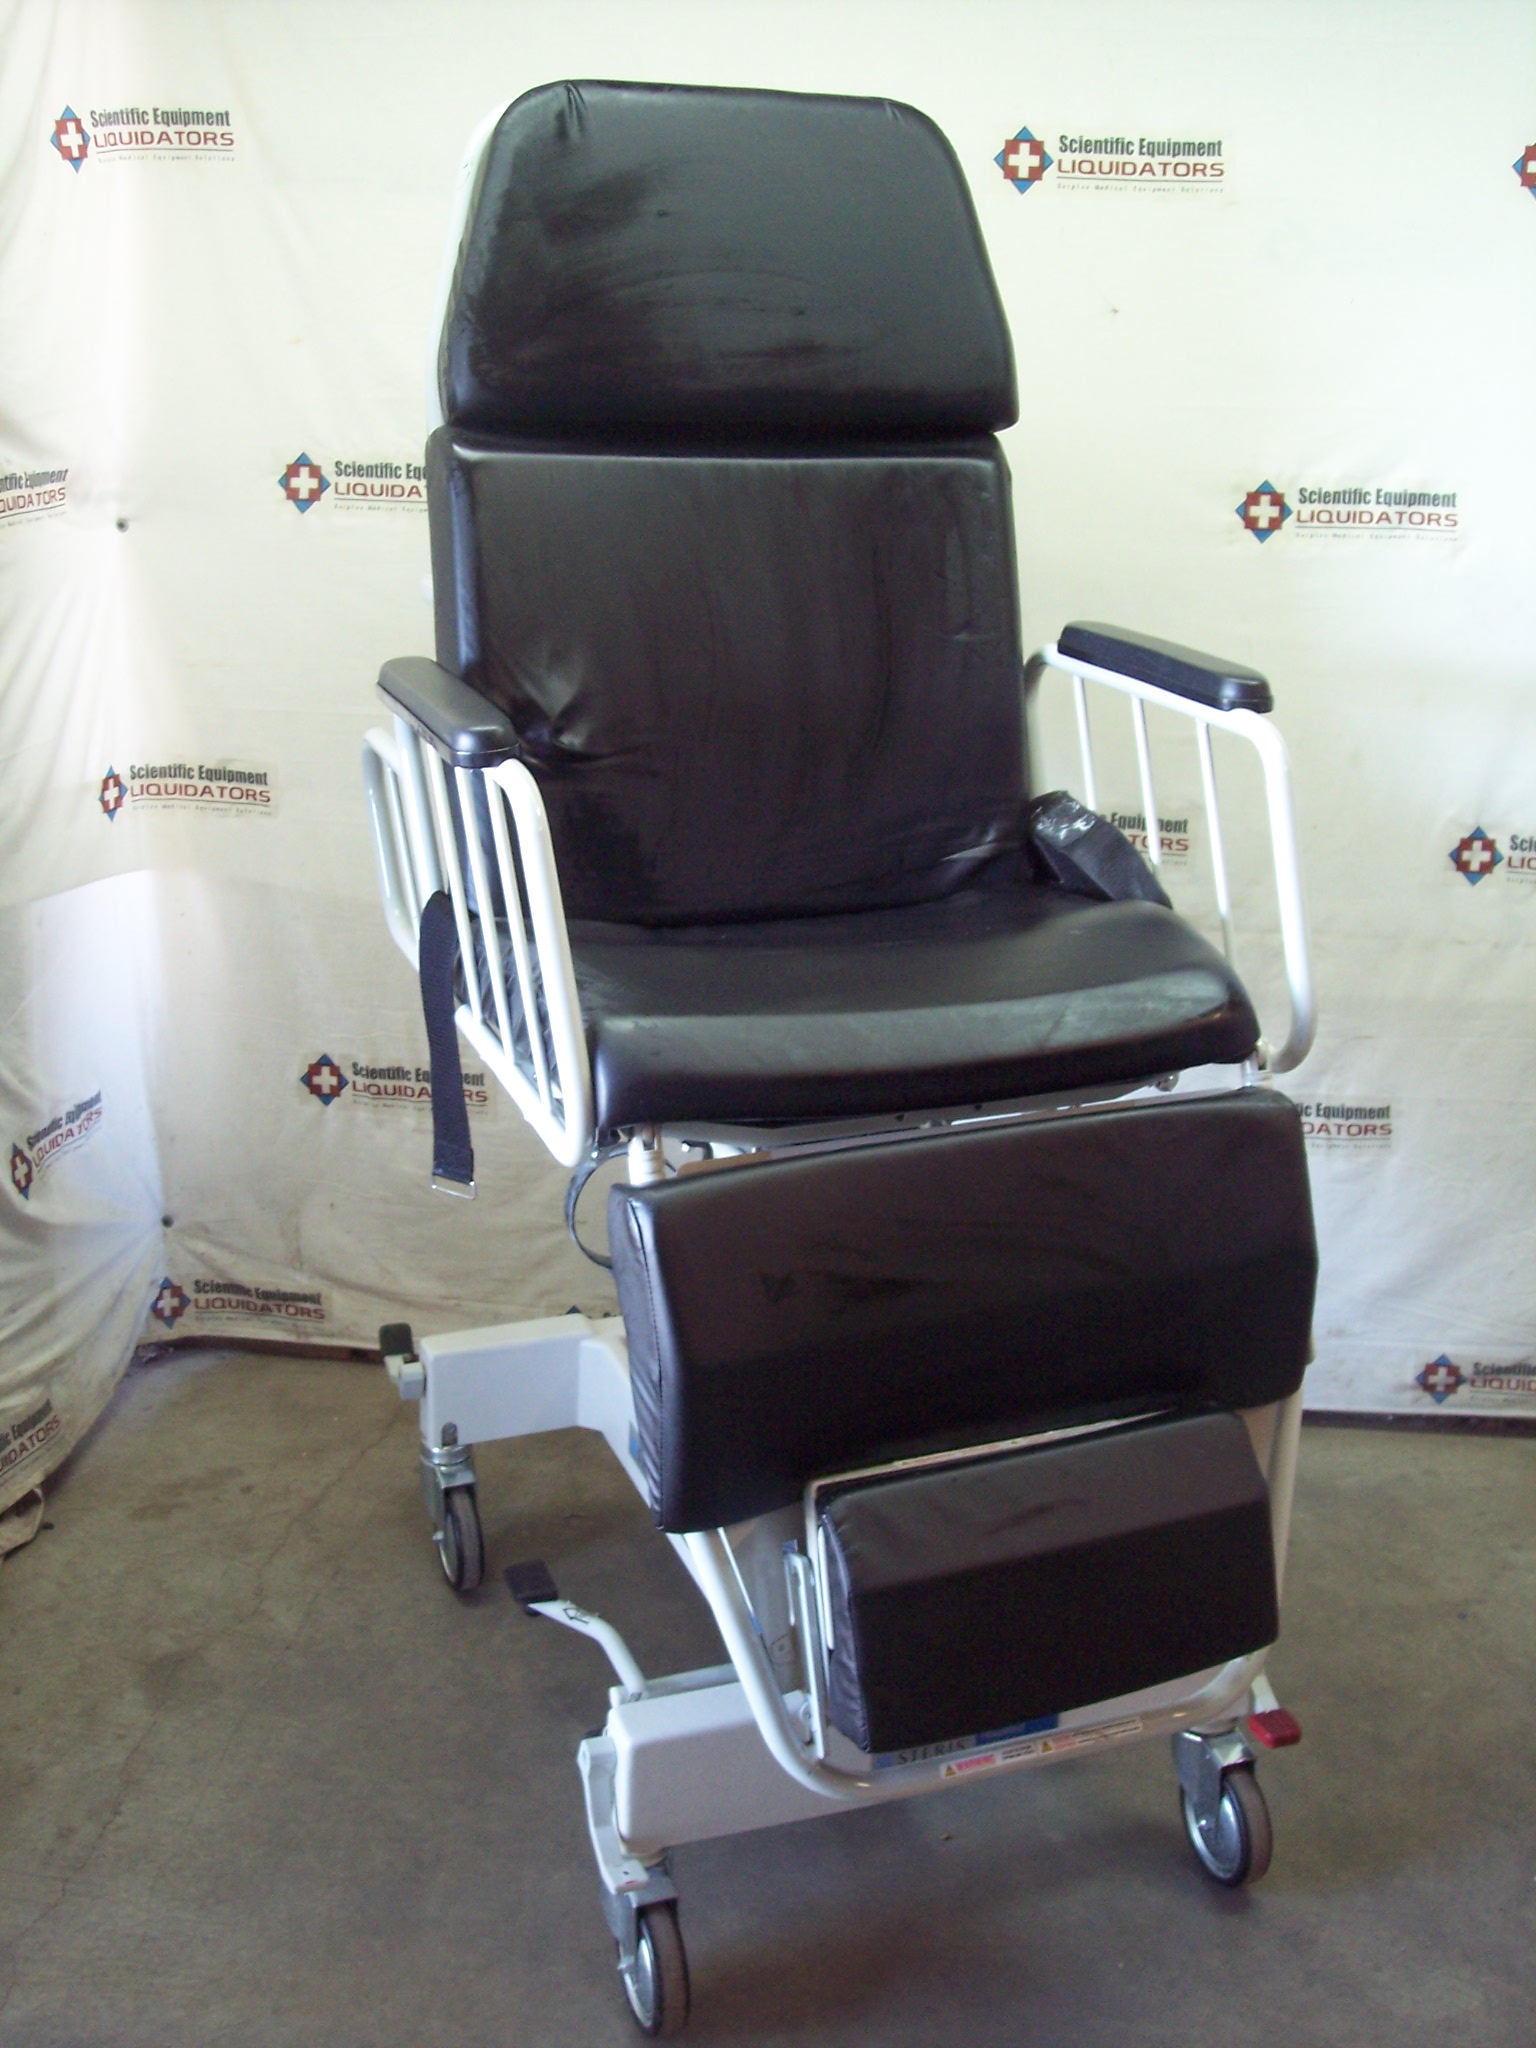 Steris Hausted APC150ST Stretcher /Chair